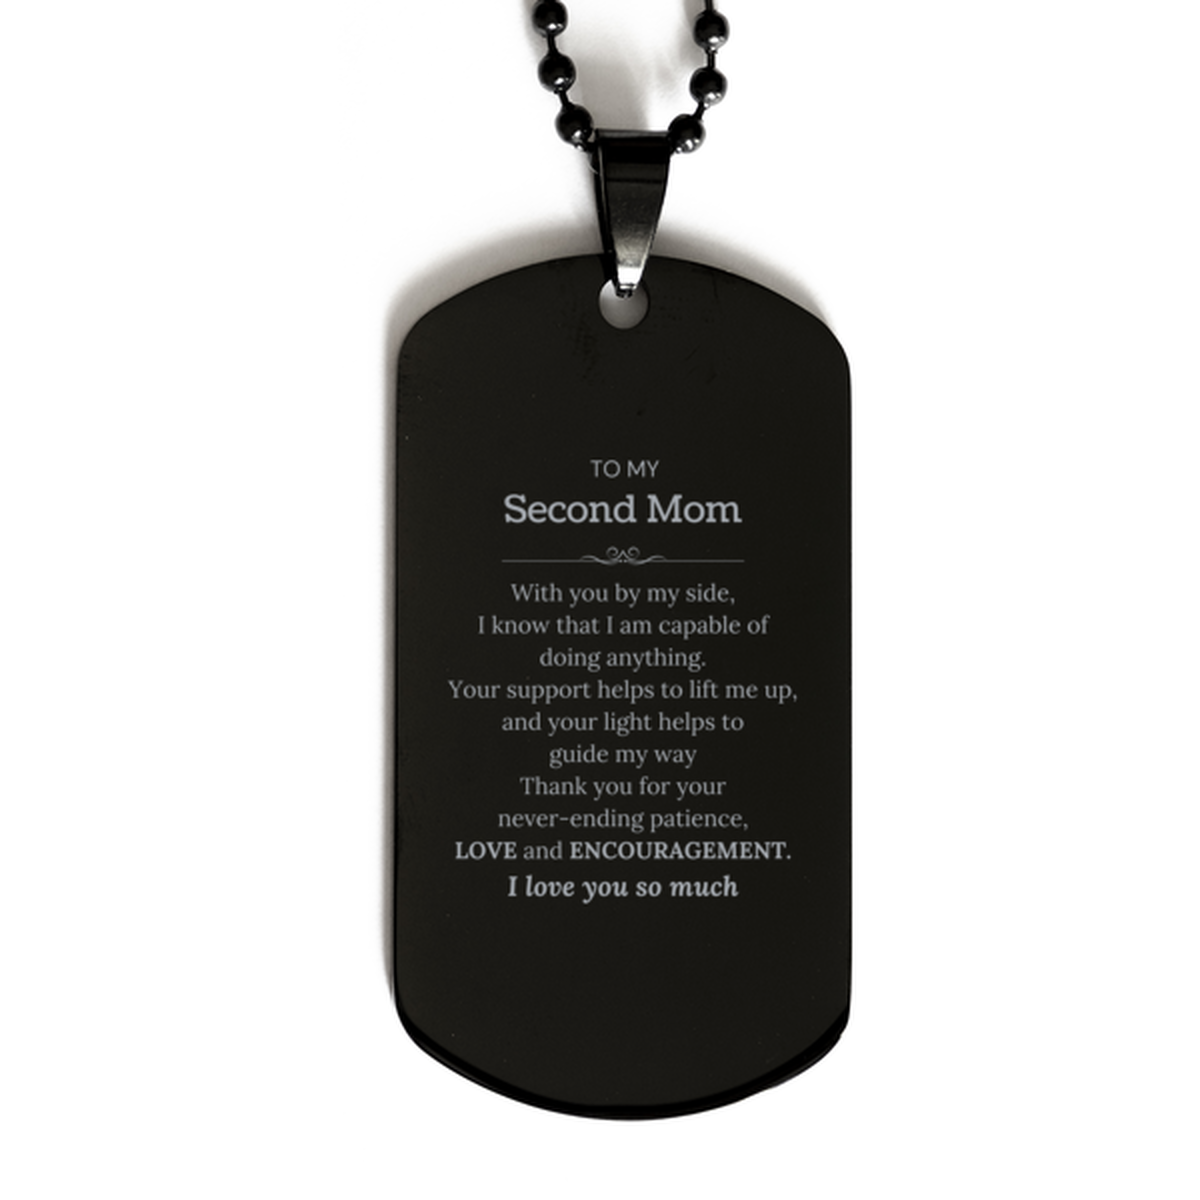 Appreciation Second Mom Black Dog Tag Gifts, To My Second Mom Birthday Christmas Wedding Keepsake Gifts for Second Mom With you by my side, I know that I am capable of doing anything. I love you so much